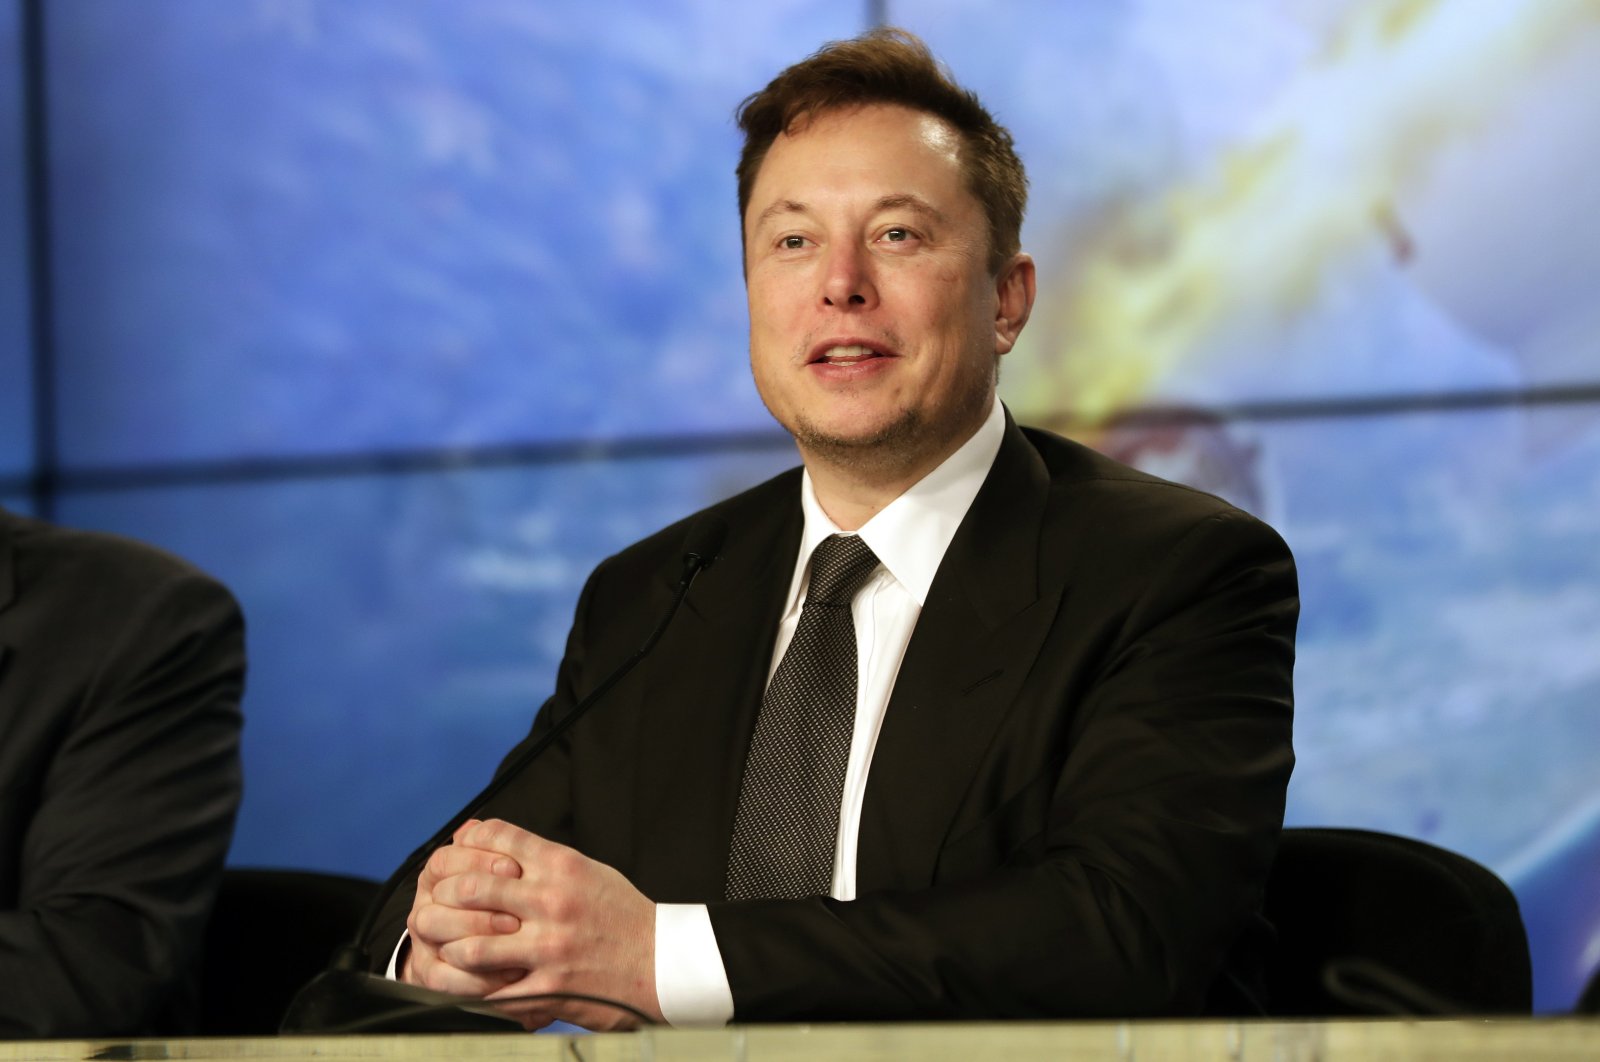 Elon Musk speaks during a news conference after a Falcon 9 SpaceX rocket test flight to demonstrate the capsule's emergency escape system at the Kennedy Space Center in Cape Canaveral, Florida, U.S., Jan. 19, 2020. (AP Photo/John Raoux, File)